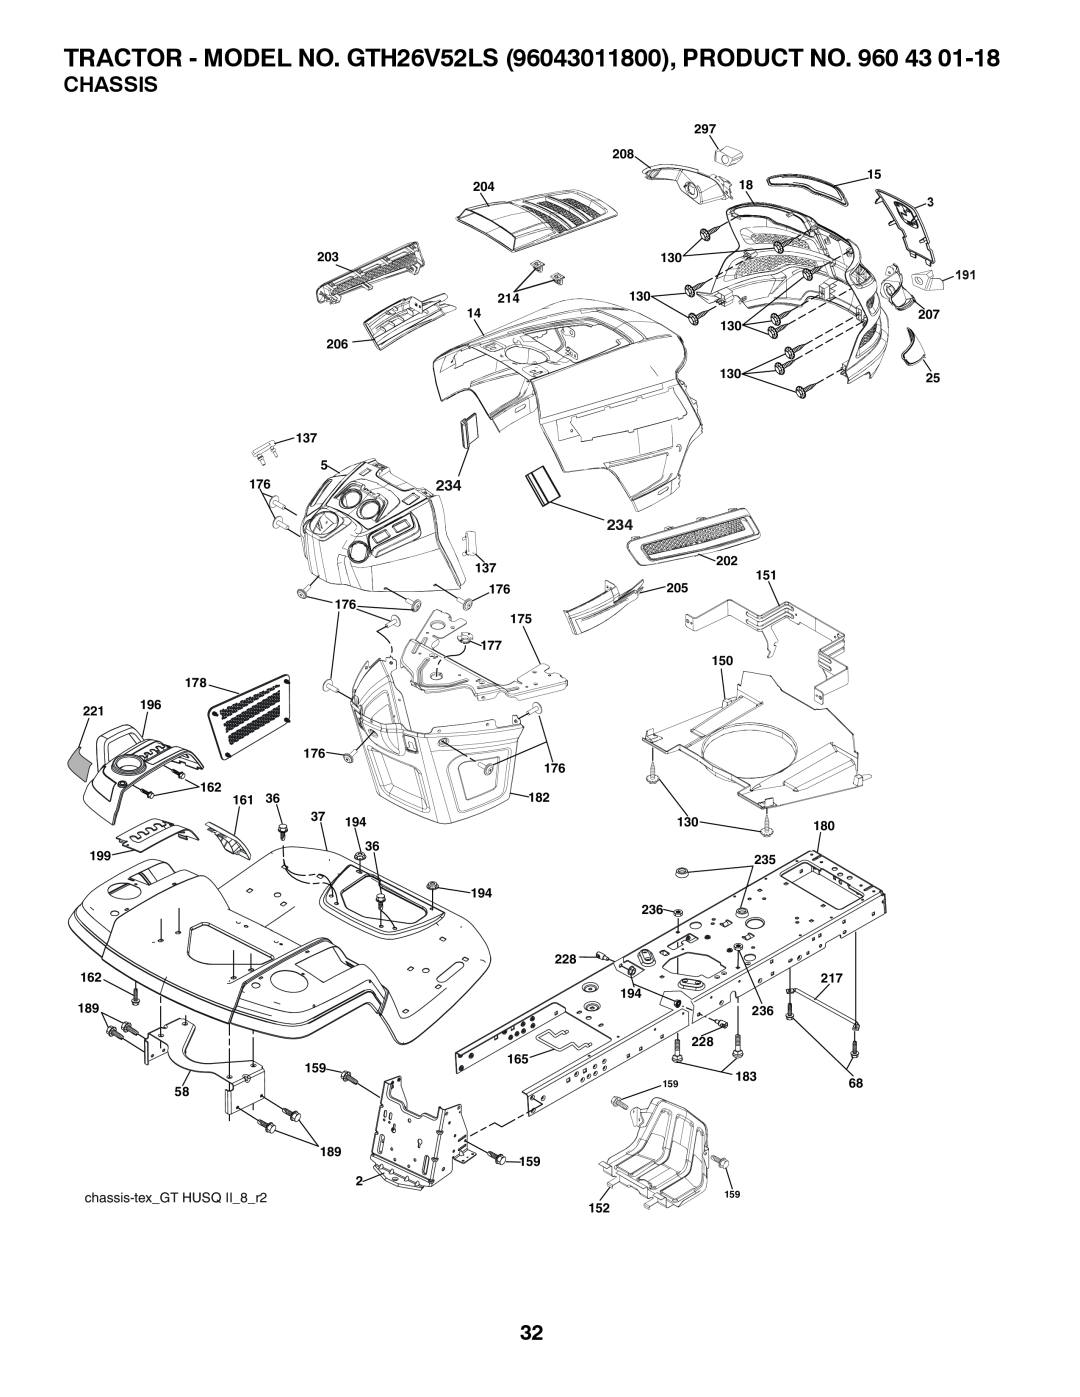 Husqvarna owner manual Chassis, TRACTOR - MODEL NO. GTH26V52LS 96043011800, PRODUCT NO, chassis-texGT HUSQ II8r2 